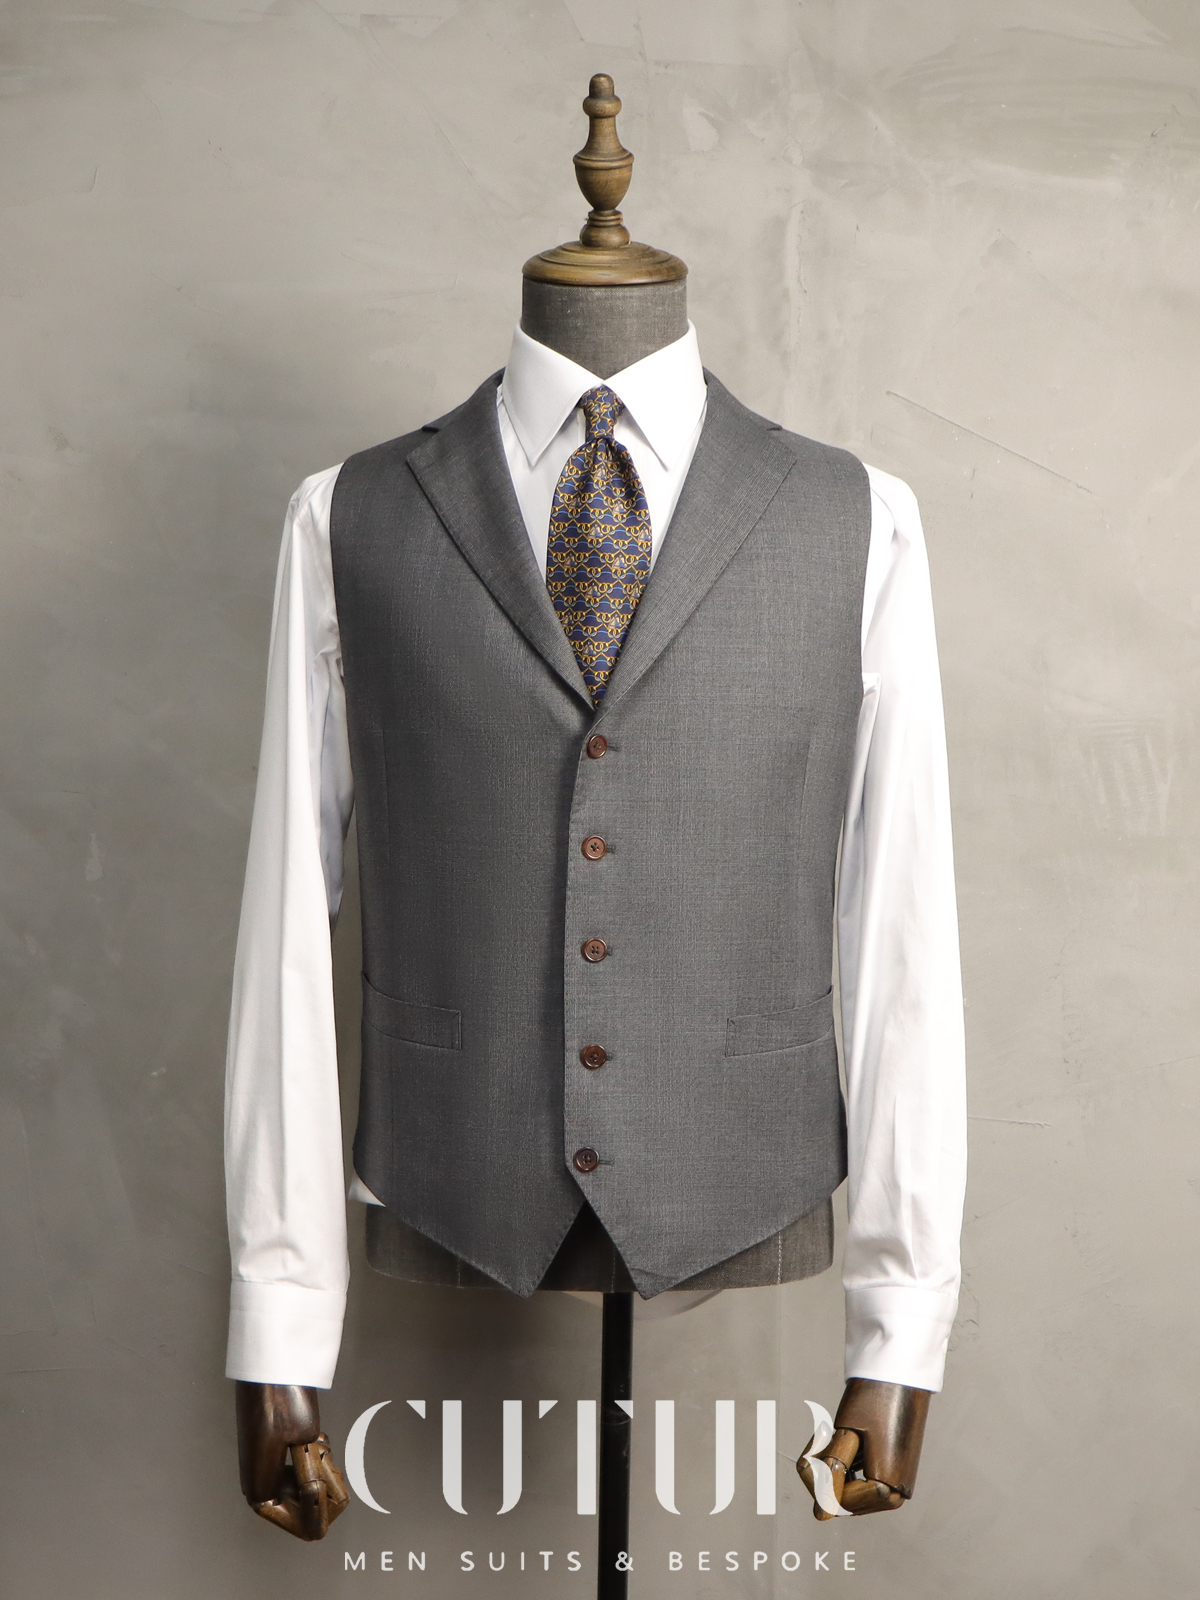 Single breasted notched lapel vest